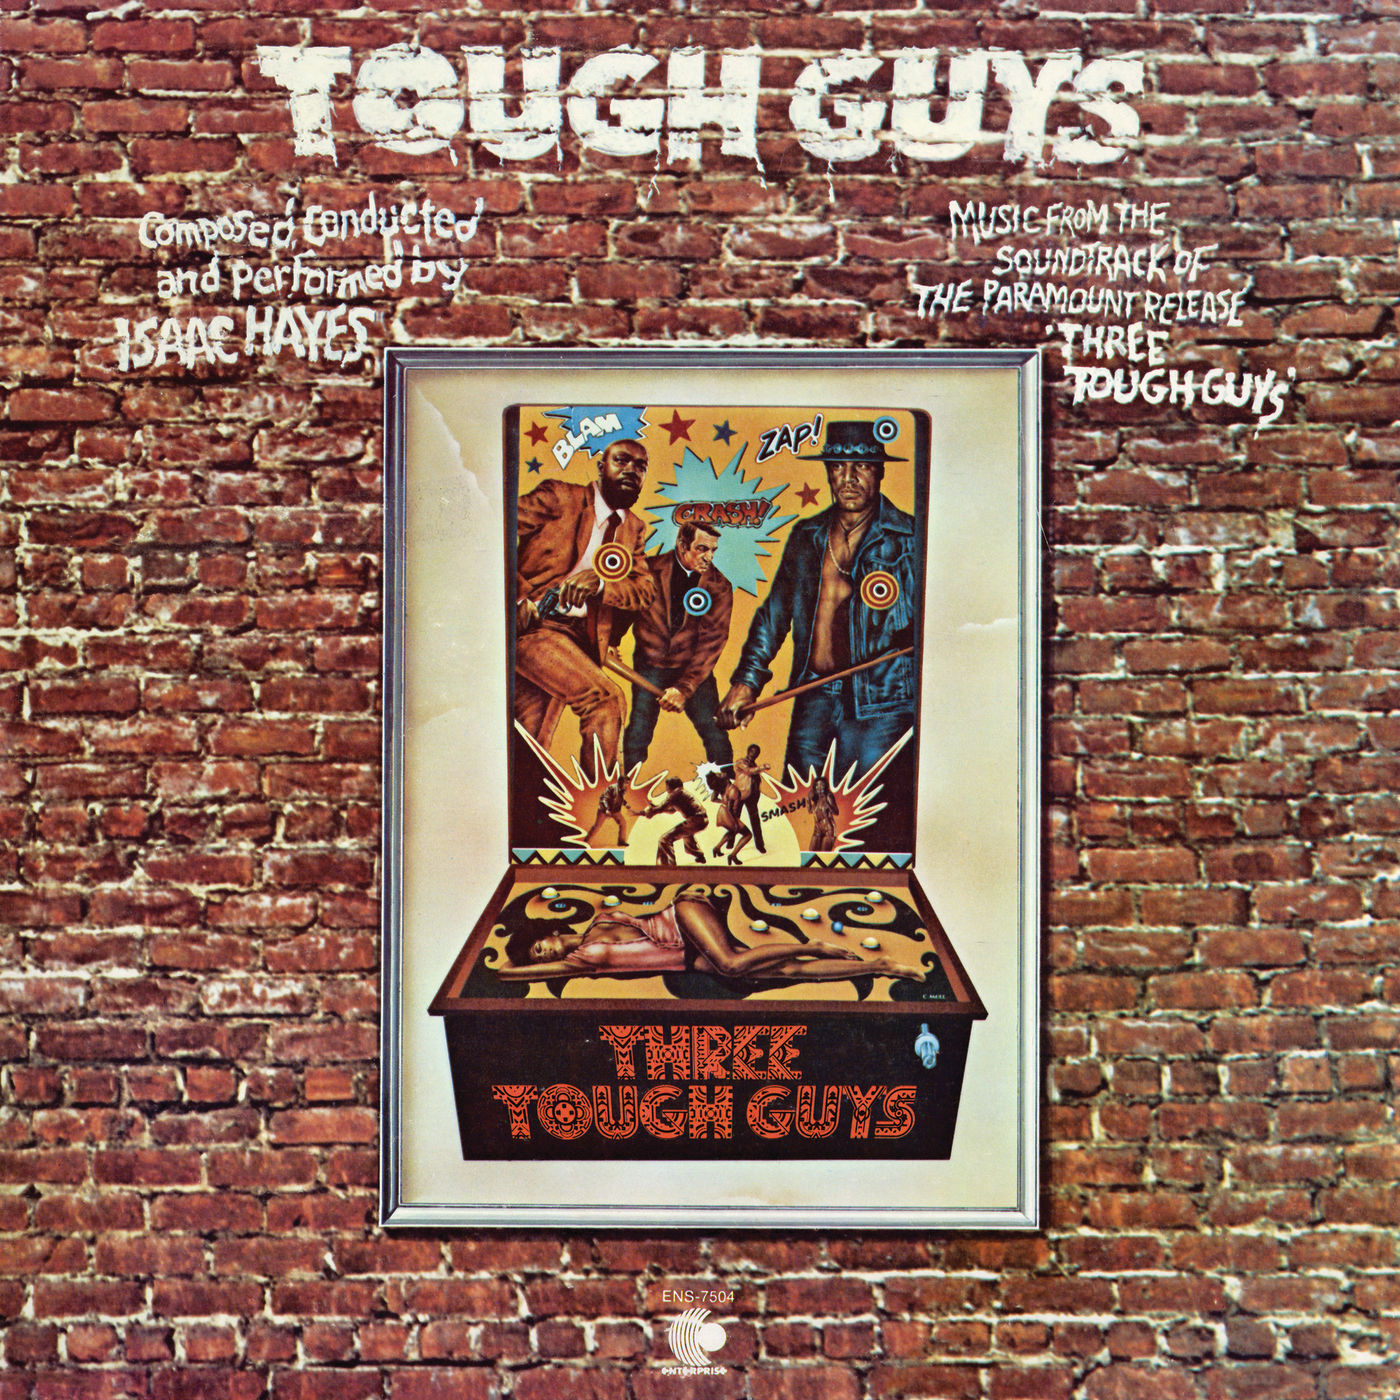 Isaac Hayes – Tough Guys – Music From The Soundtrack Of The Paramount Release Three Tough Guys【192kHz／24bit】美国区-OppsUpro音乐帝国